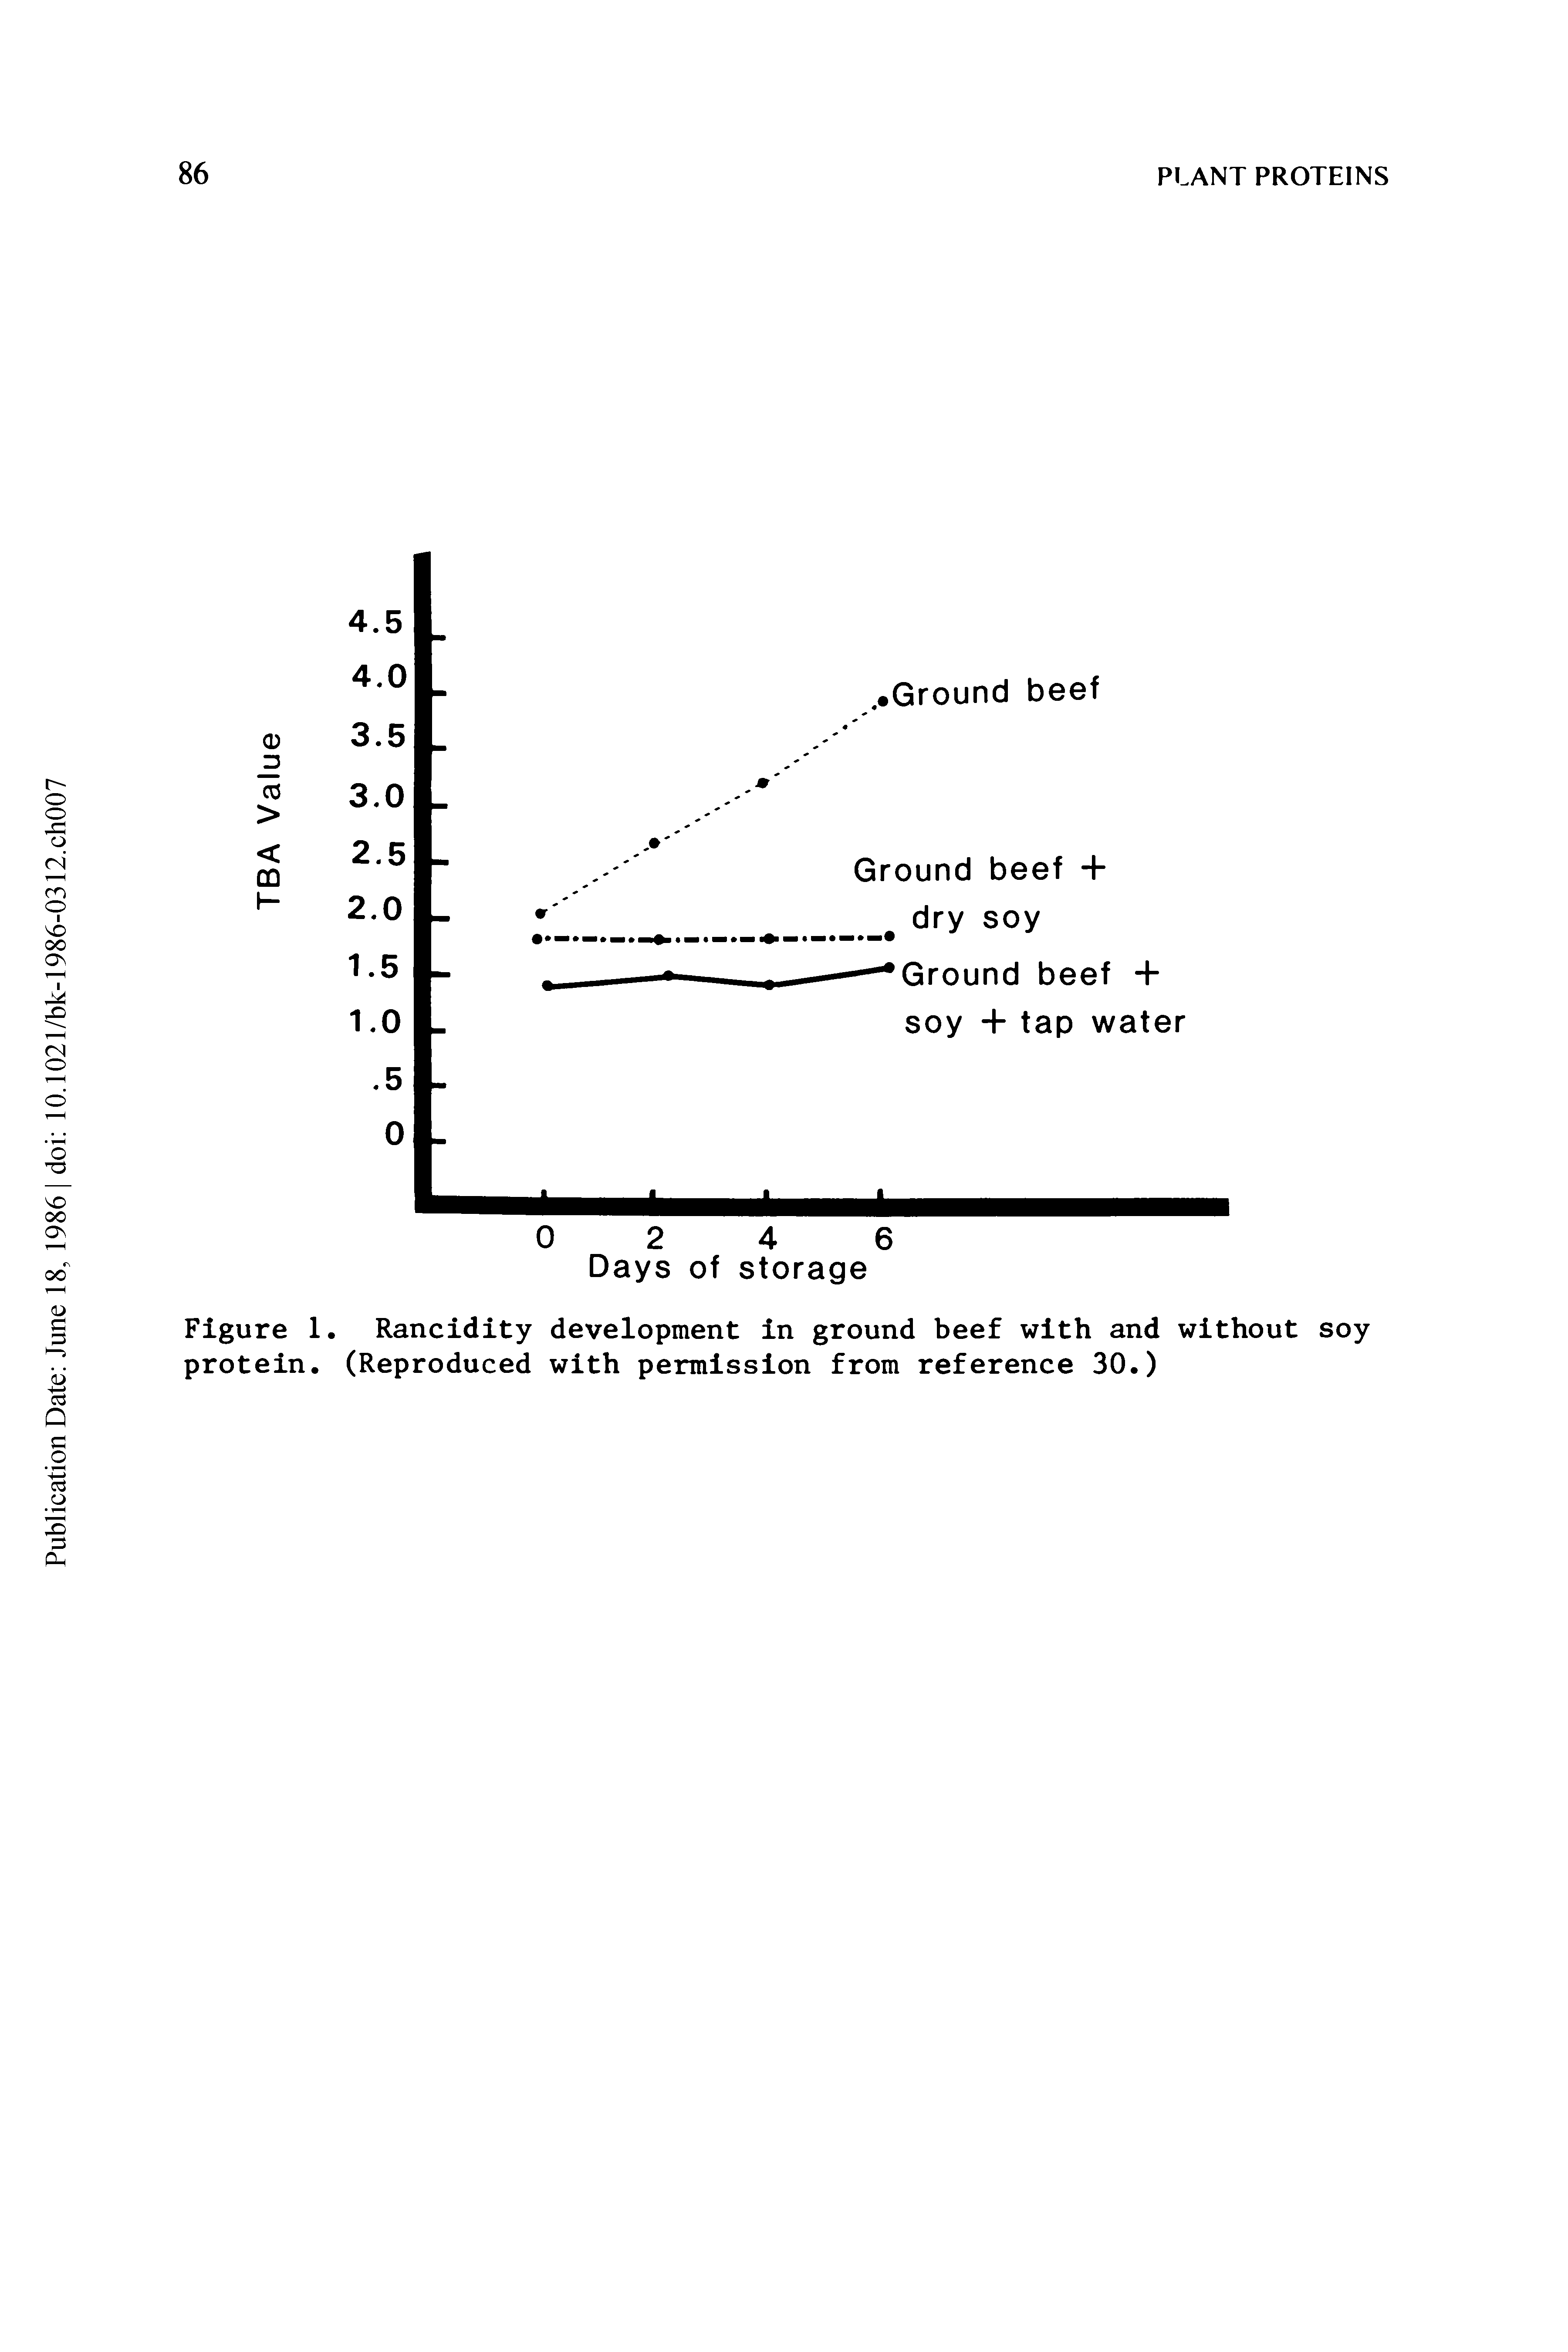 Figure 1. Rancidity development in ground beef with and without soy protein. (Reproduced with permission from reference 30.)...